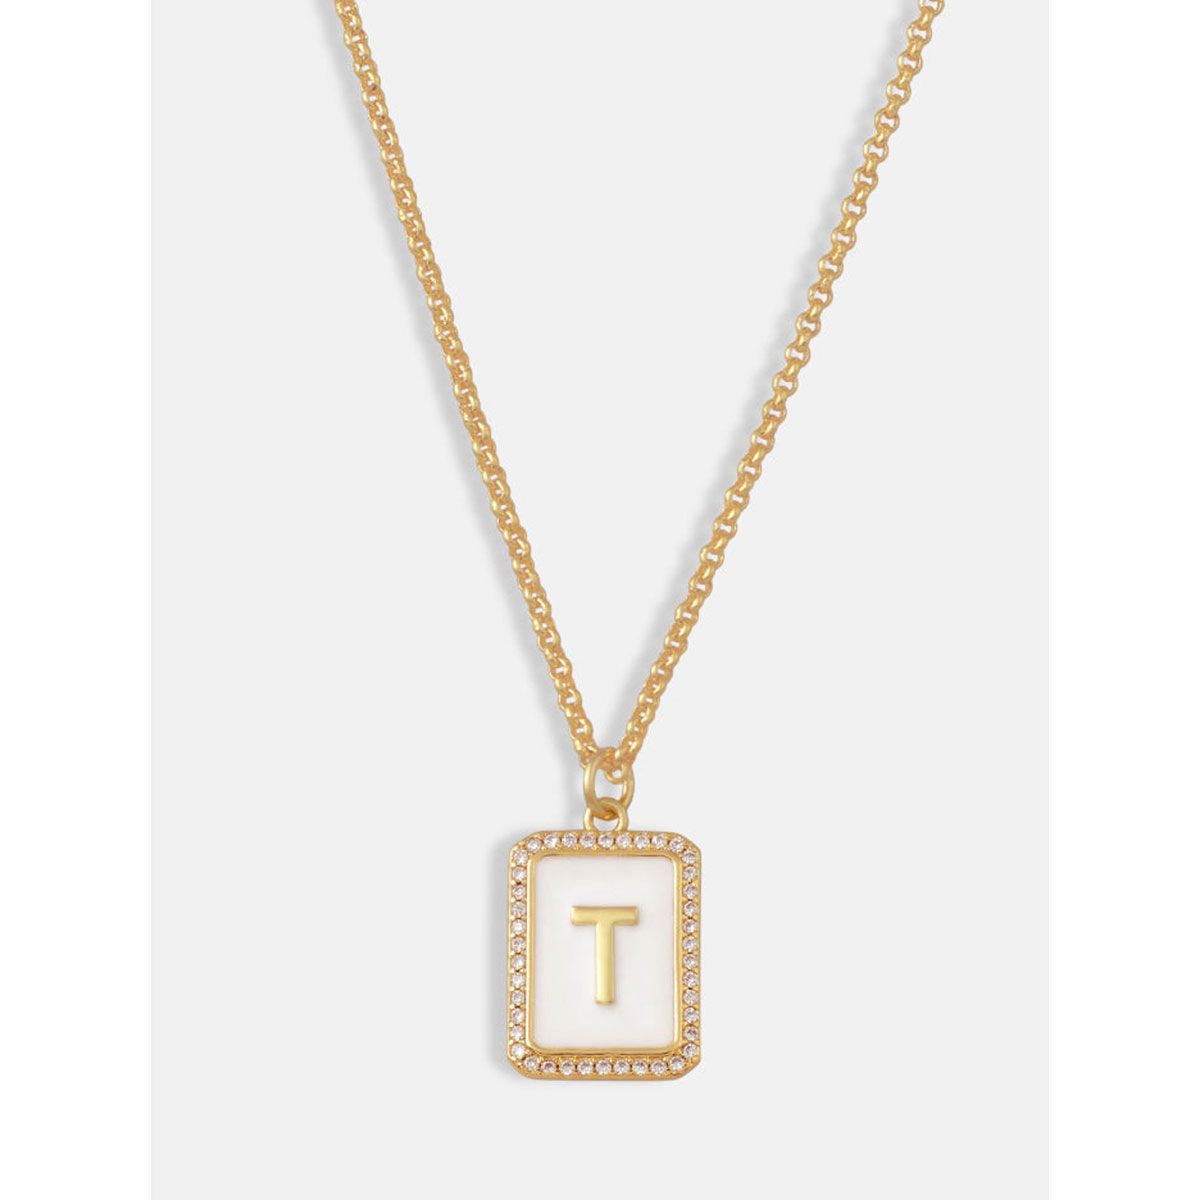 T - Letter Name Necklace Initial Necklace | Initial necklace, Initial necklace  gold, Gold letter necklace